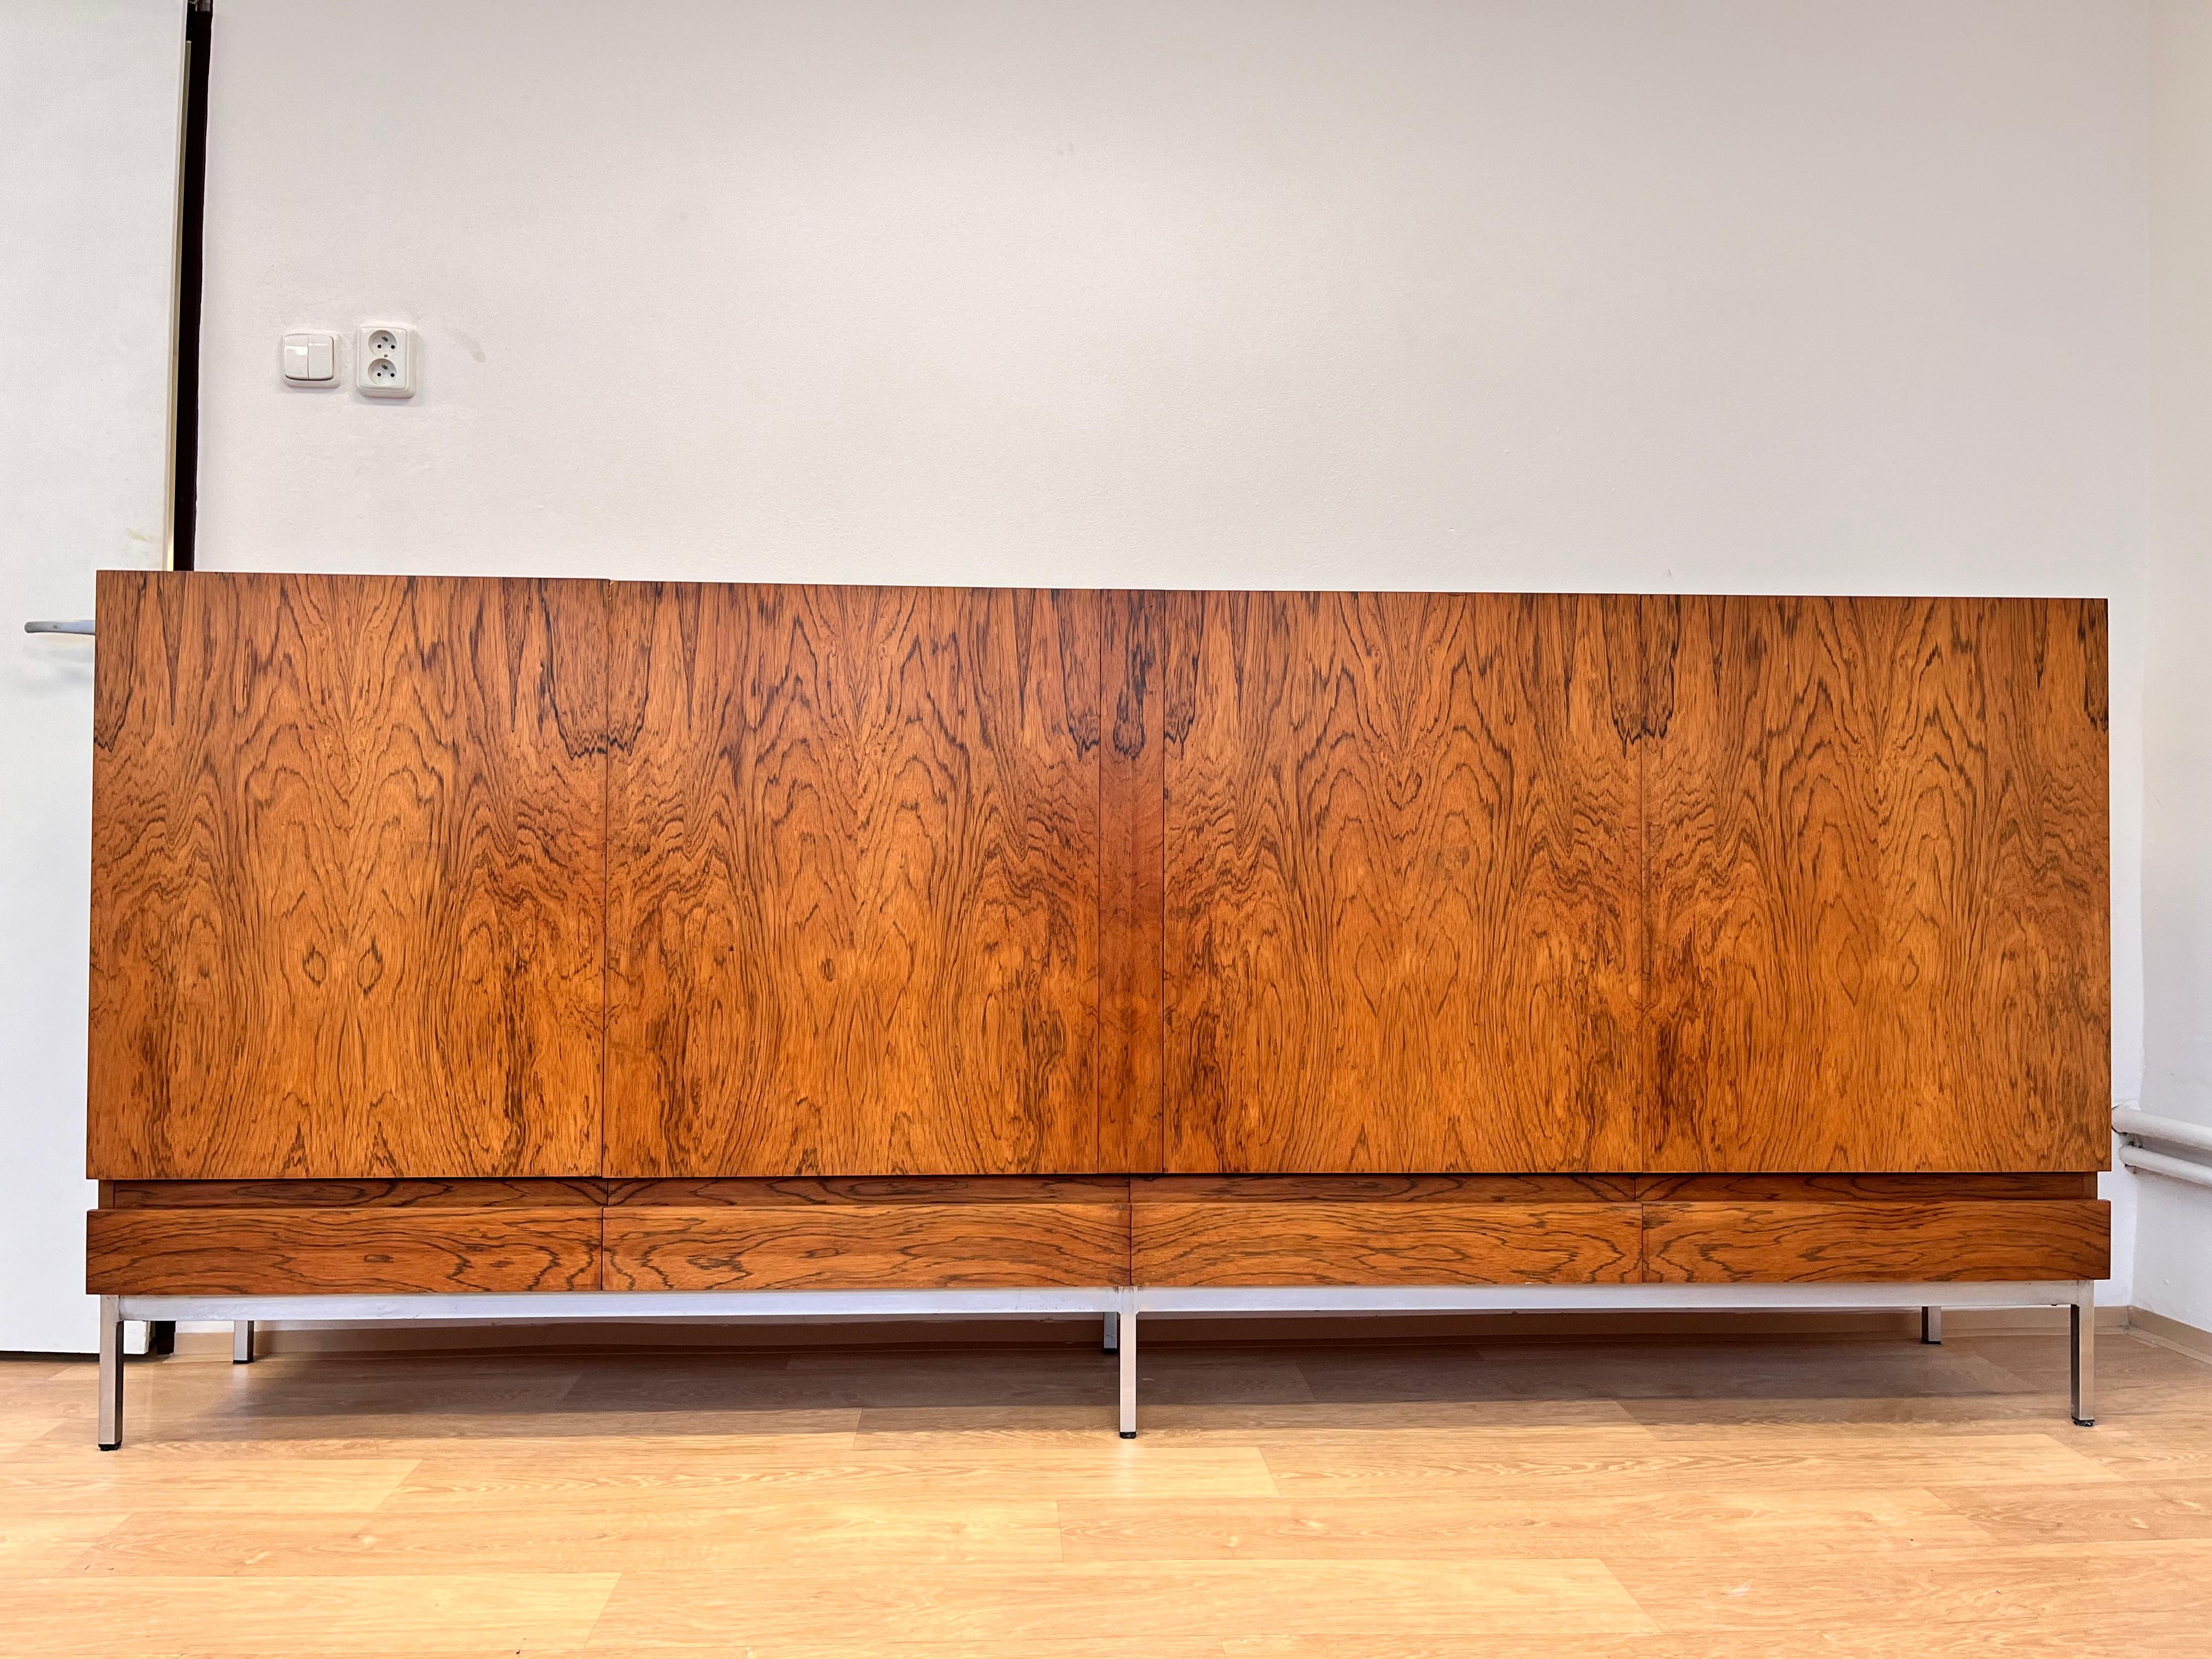 - Rio Rosewood veneer
- very good original condition
- completely cleaned and refreshed !!
- marked by Behr Swiss interior
- inside is covered with a maple veneer with beautiful contrast
- perfect ultra-reductionist mid-century design with no